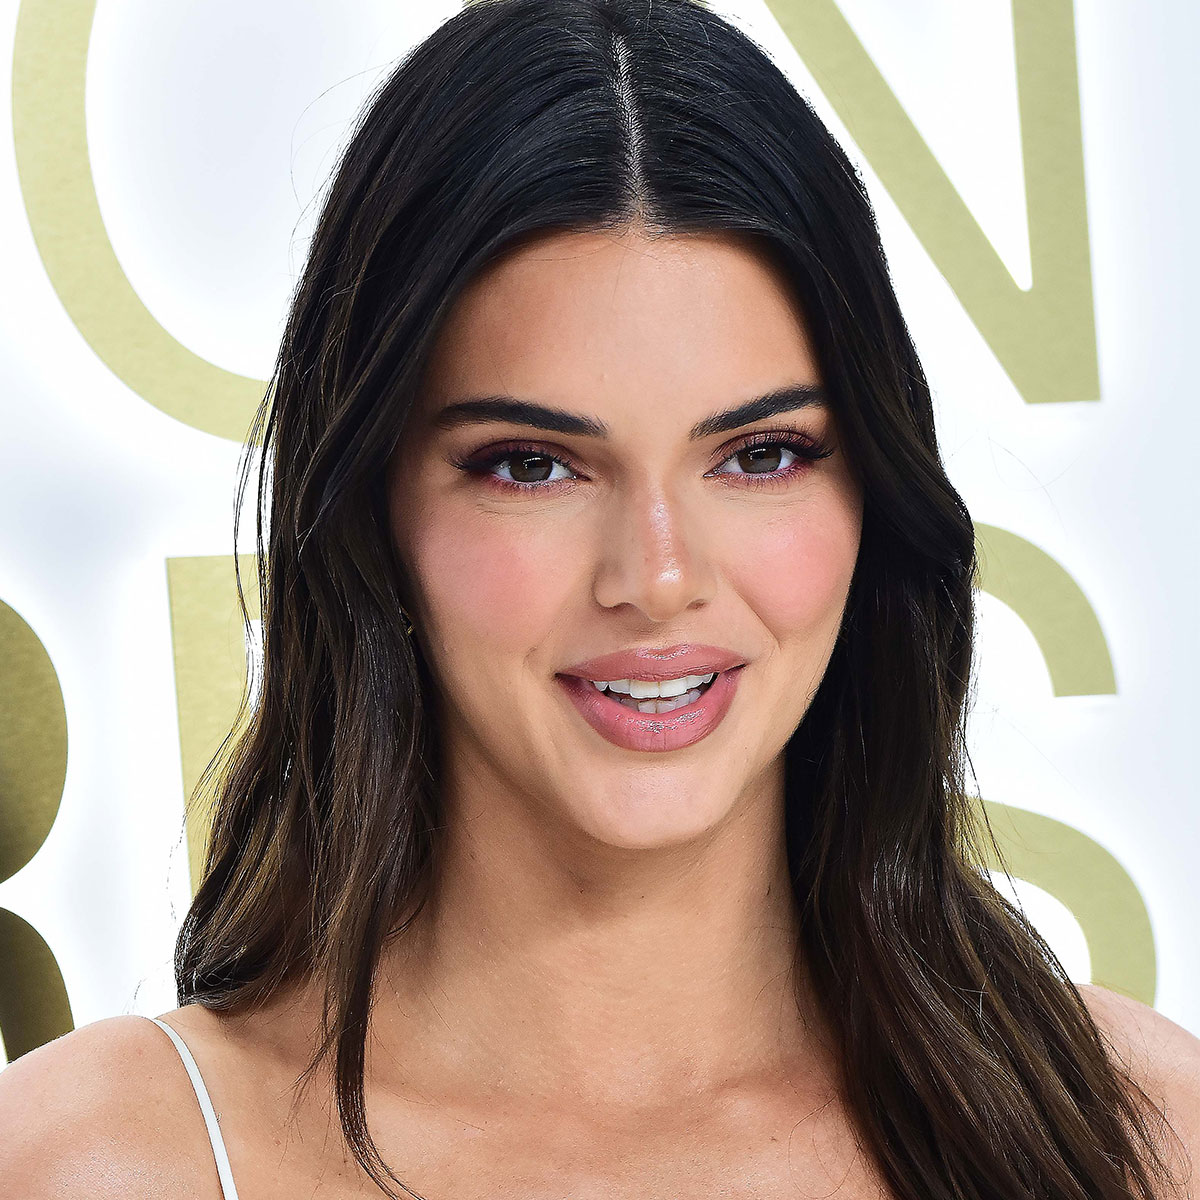 Kendall Jenner stepped out in a stylish sheer dress for an 818